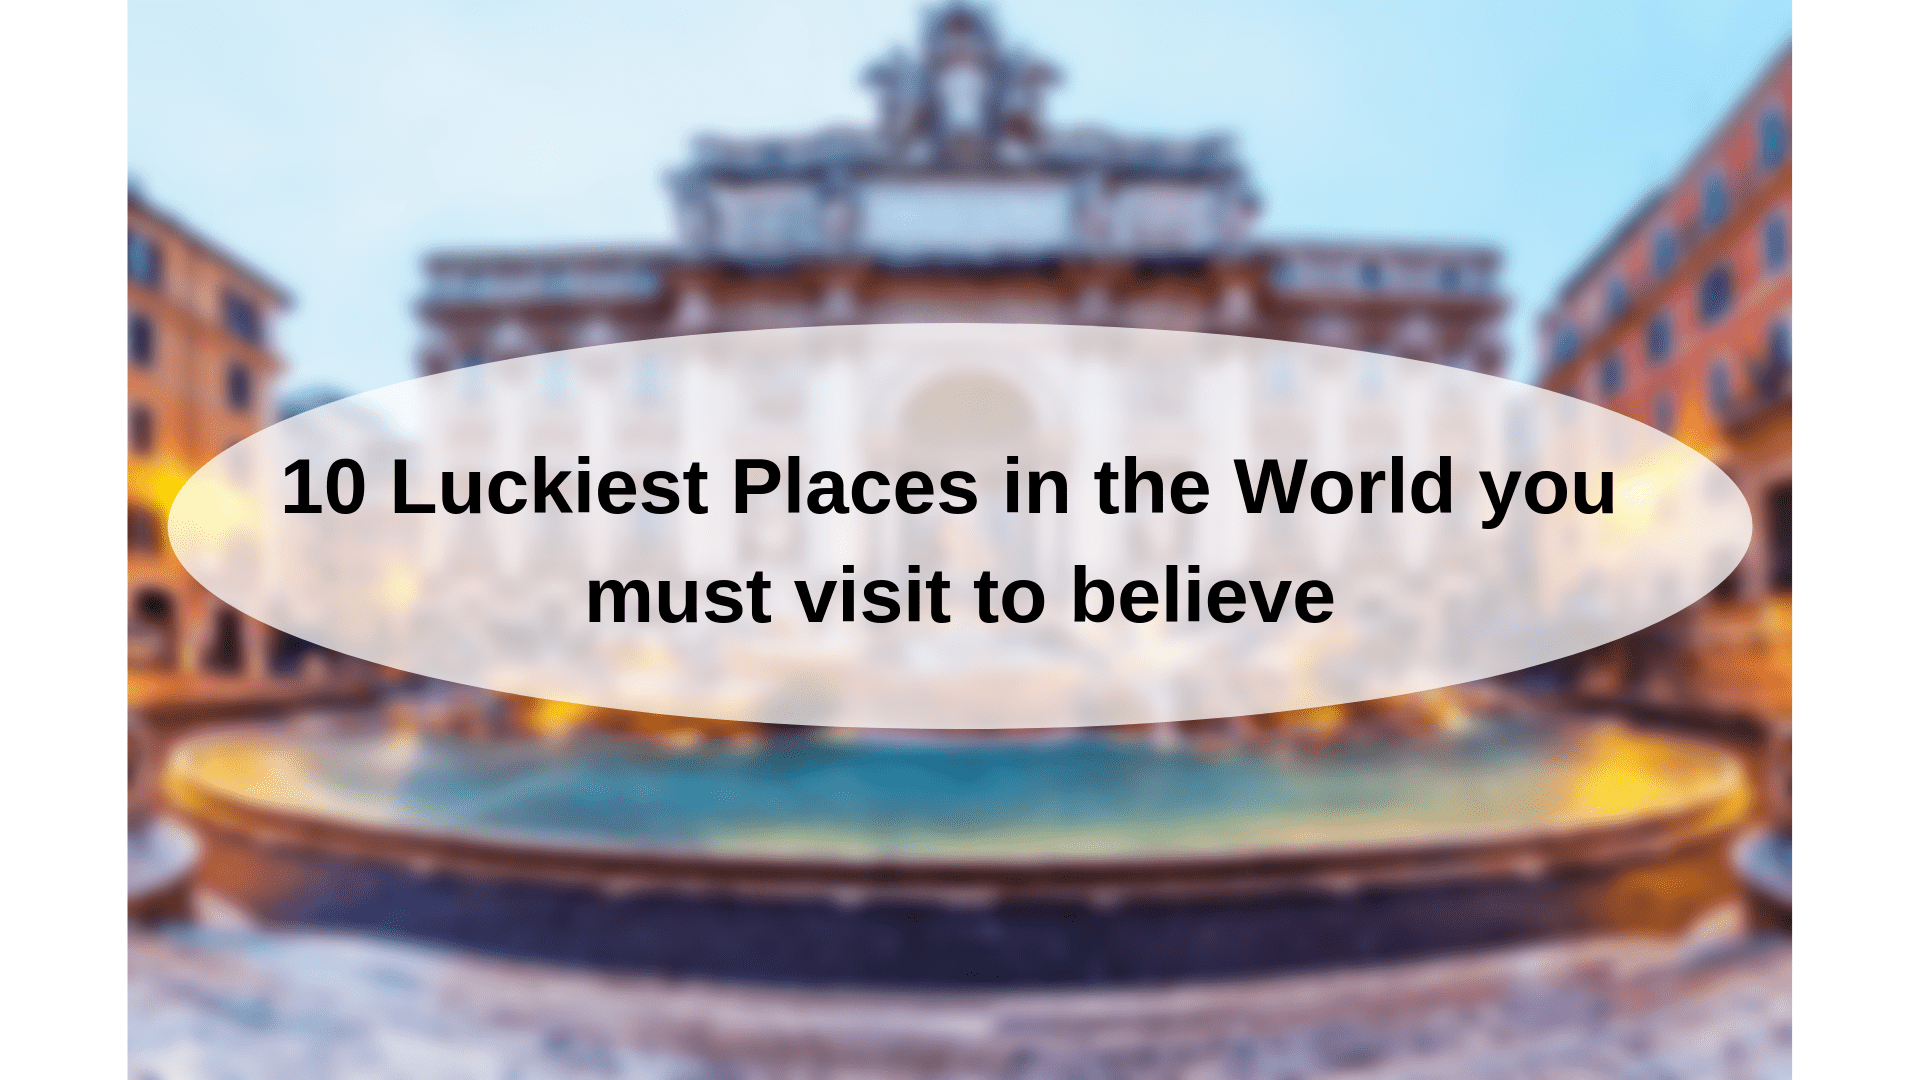 10 Luckiest Places in the World you must visit to believe